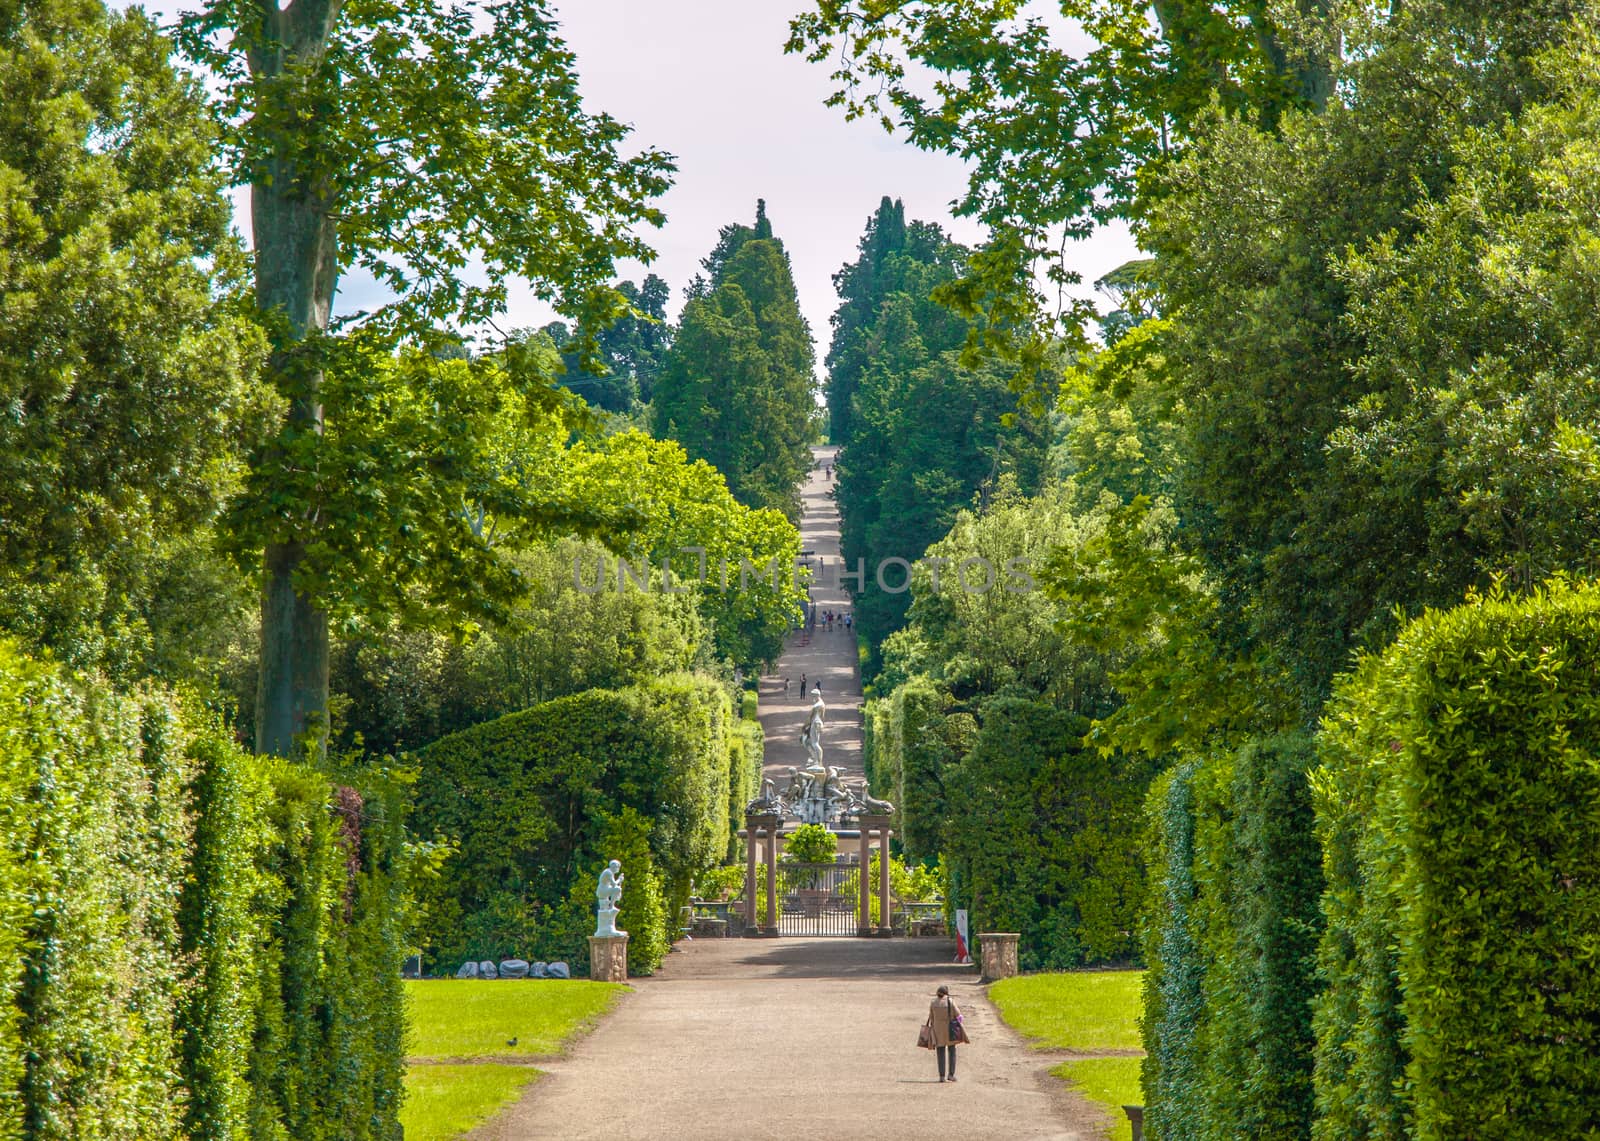 Boboli Gardens - green park and open-air museum in Florence, Tuscany, Italy.